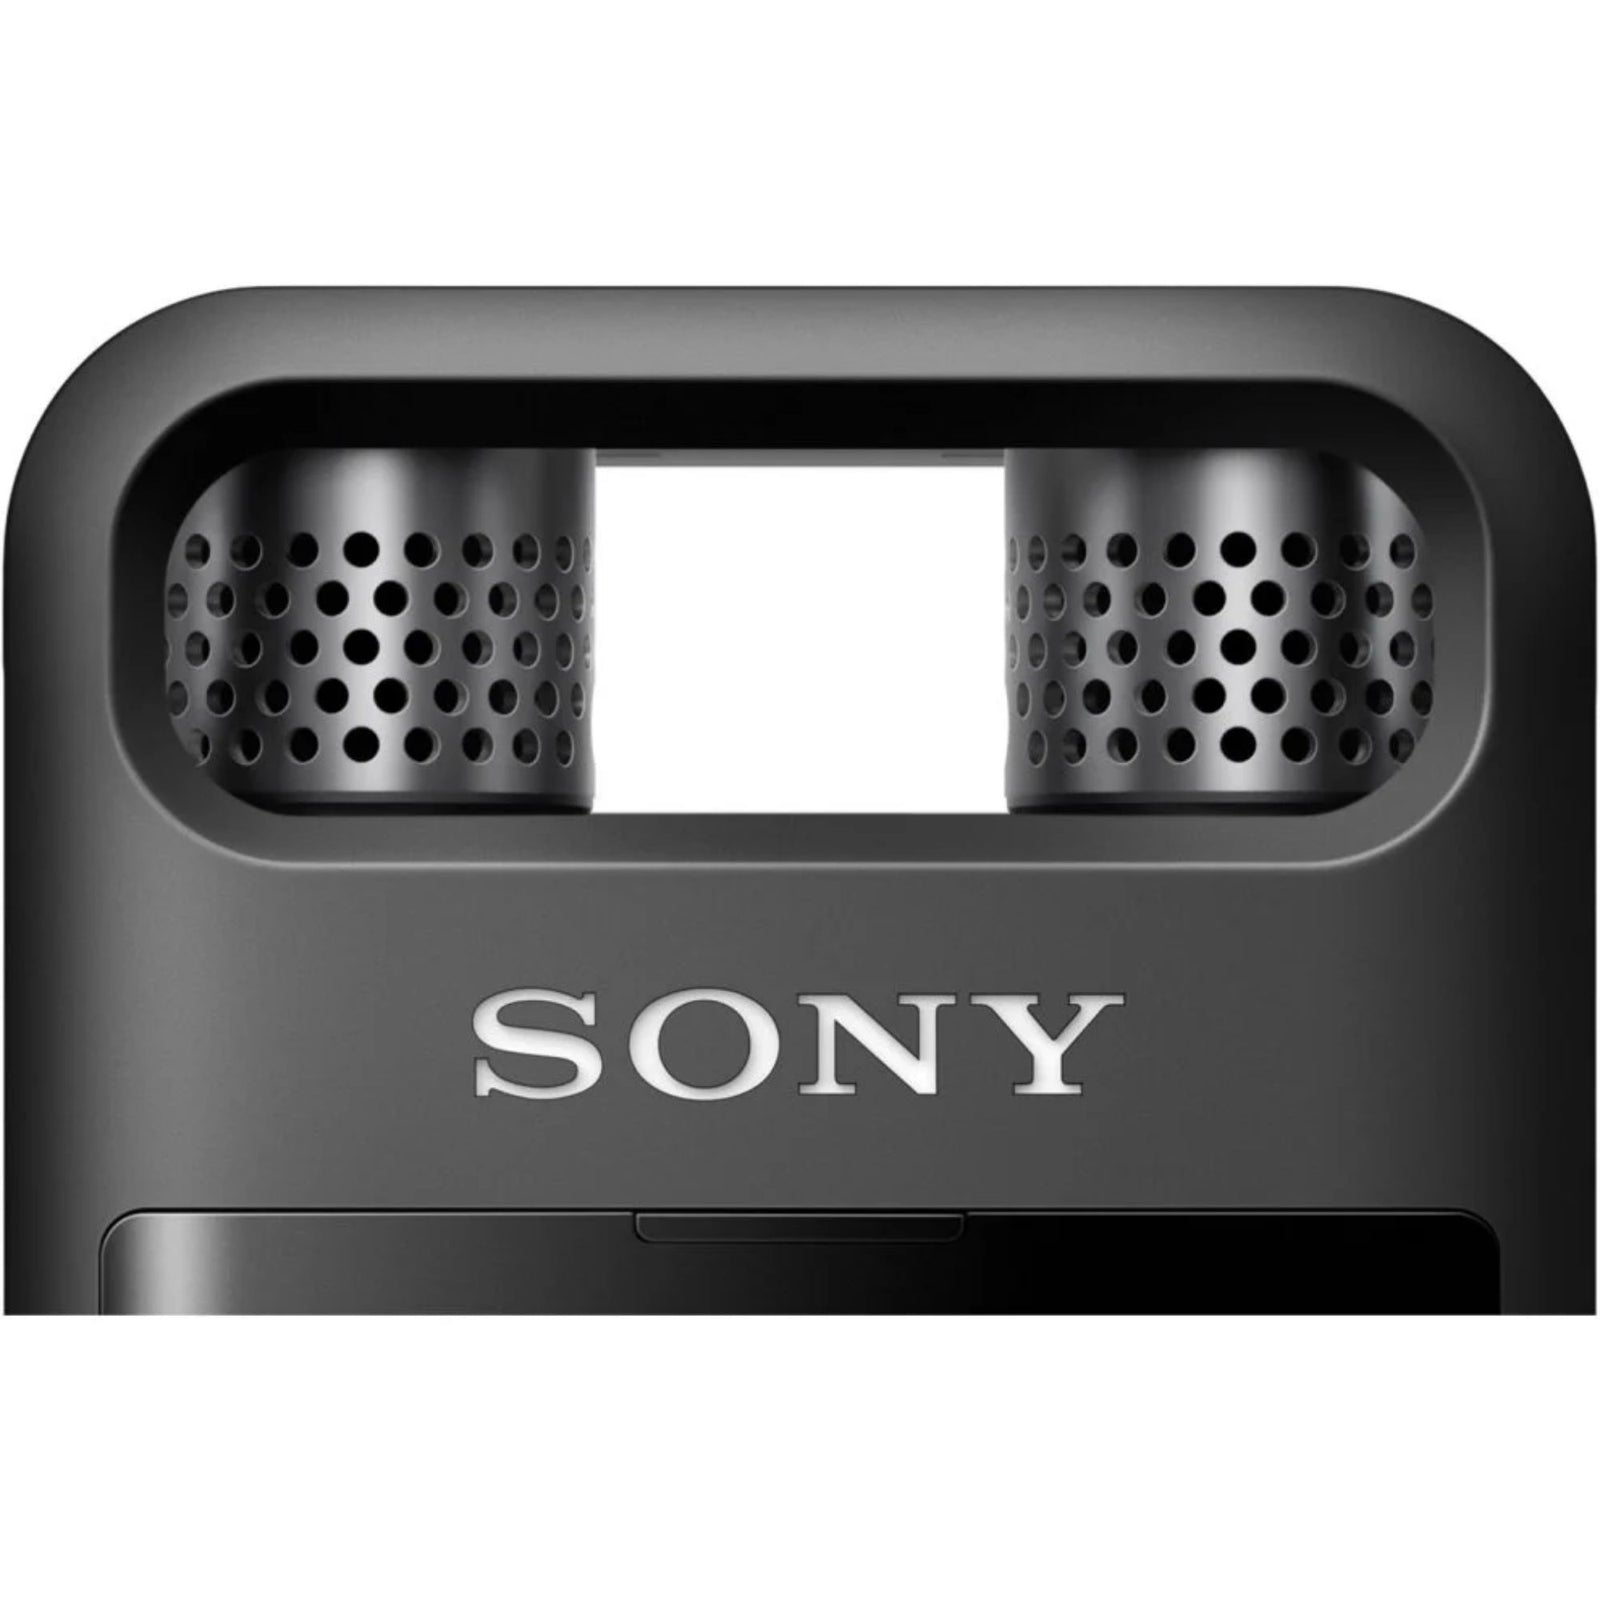 Sony Pcm-a10 High-resolution Audio Recorder